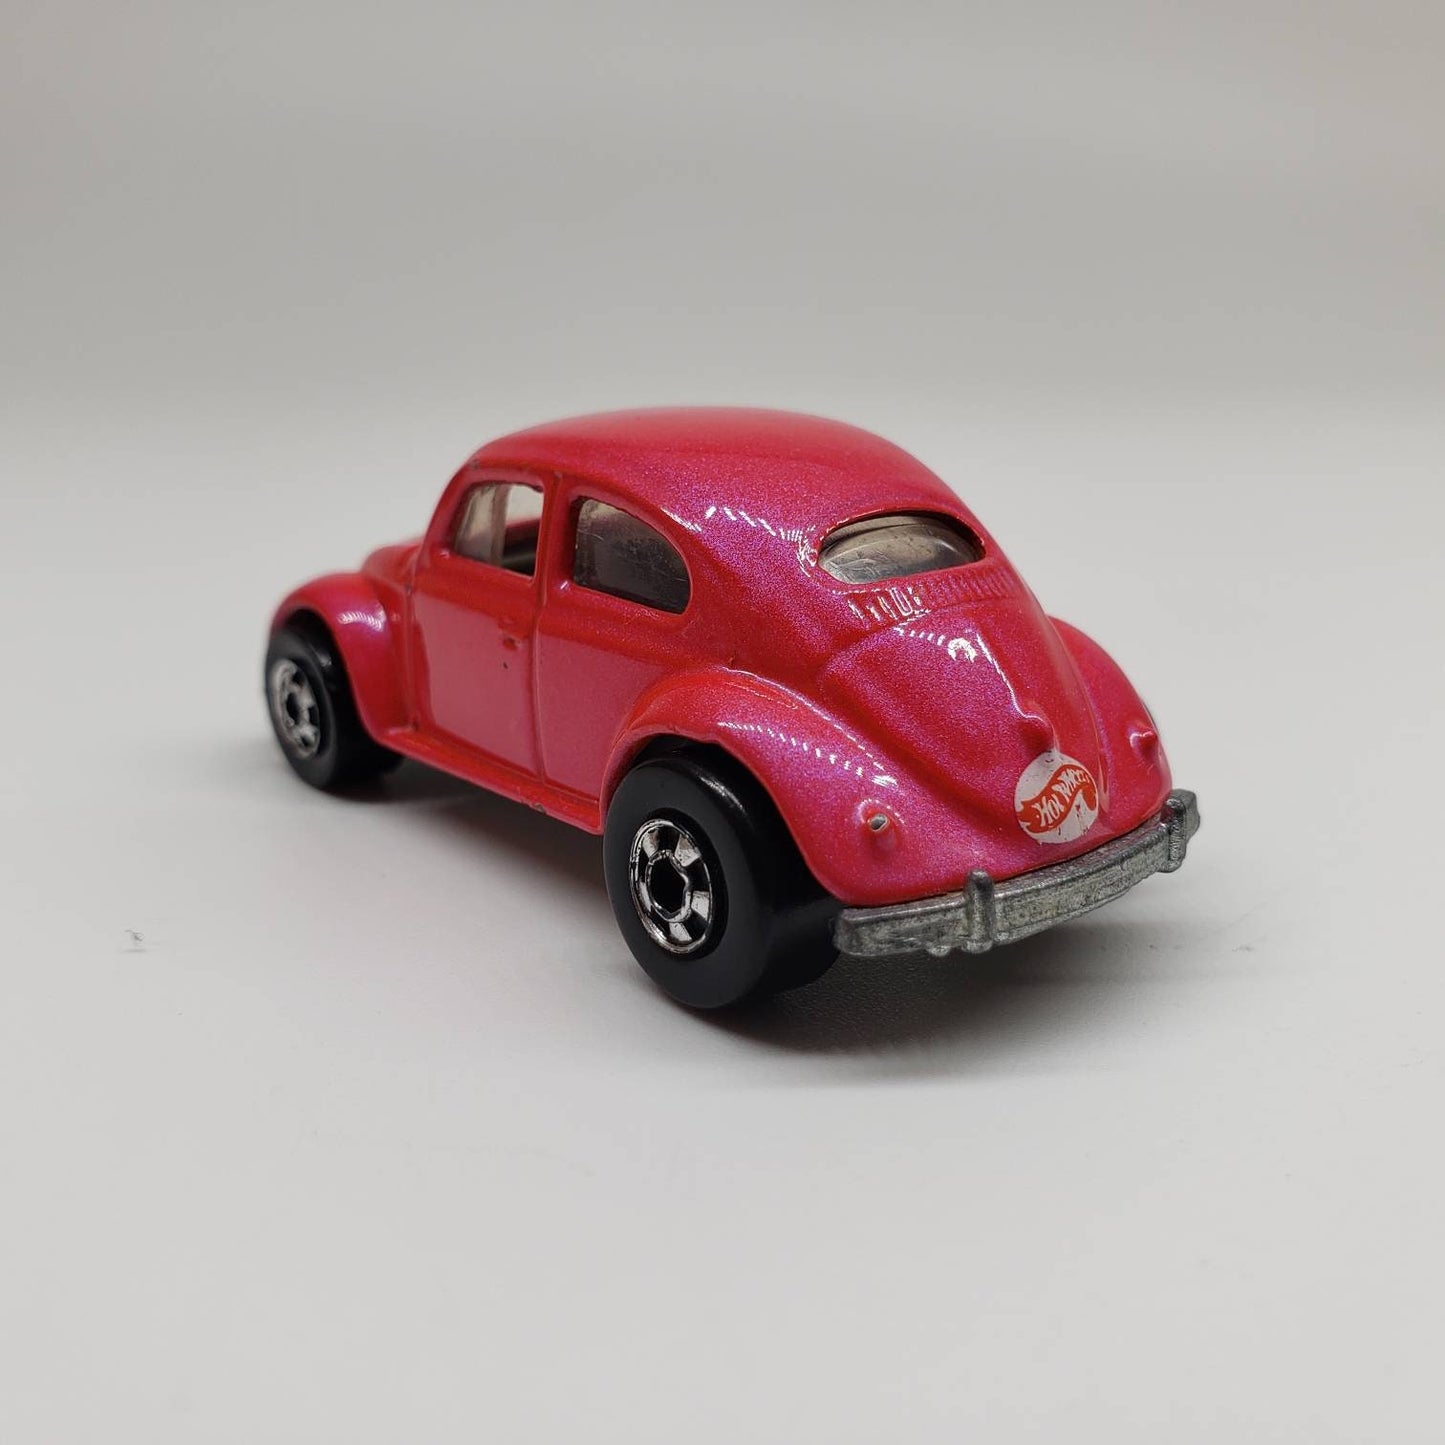 Hot Wheels VW Bug Pink Pearl Driver Volkswagen Beetle Collectible Miniature Scale Model Toy Car Perfect Birthday Gift